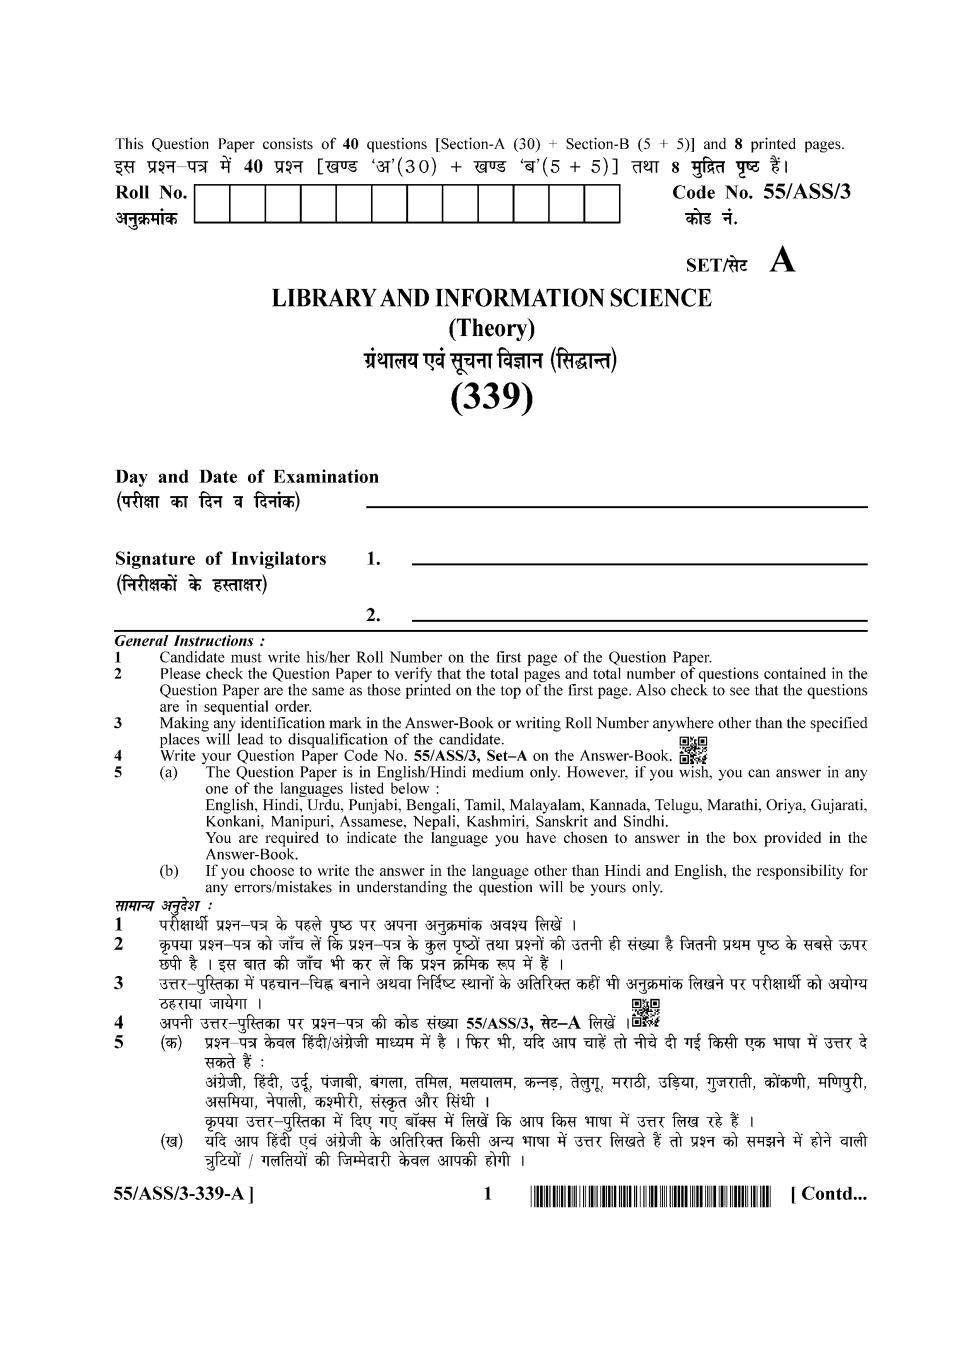 NIOS Class 12 Question Paper Oct 2017 - Library And Information Science - Page 1